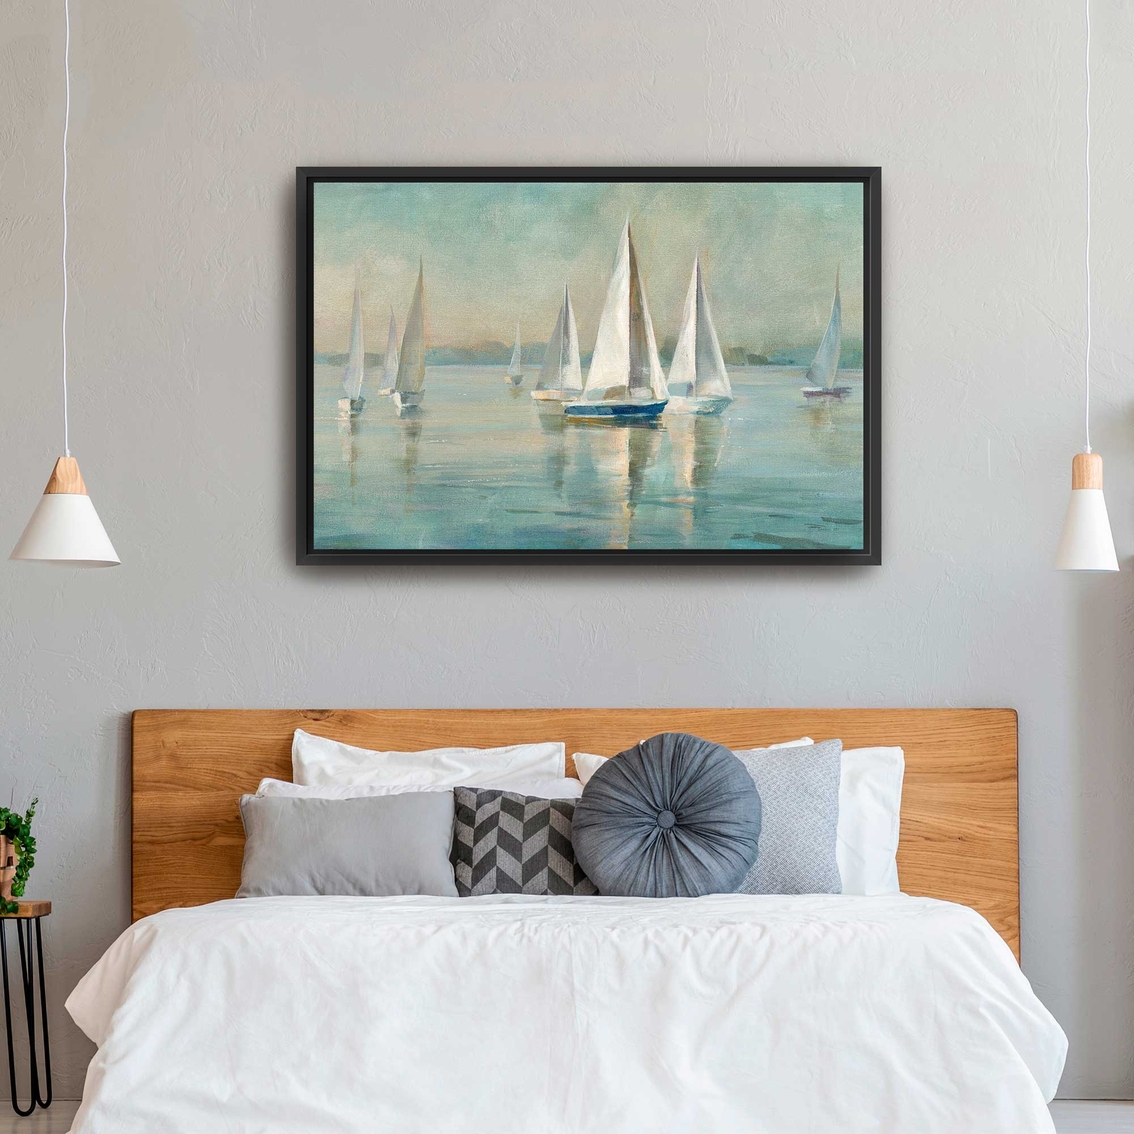 Inkstry Sailboats at Sunrise Crop Framed Canvas Giclee - Image 3 of 3